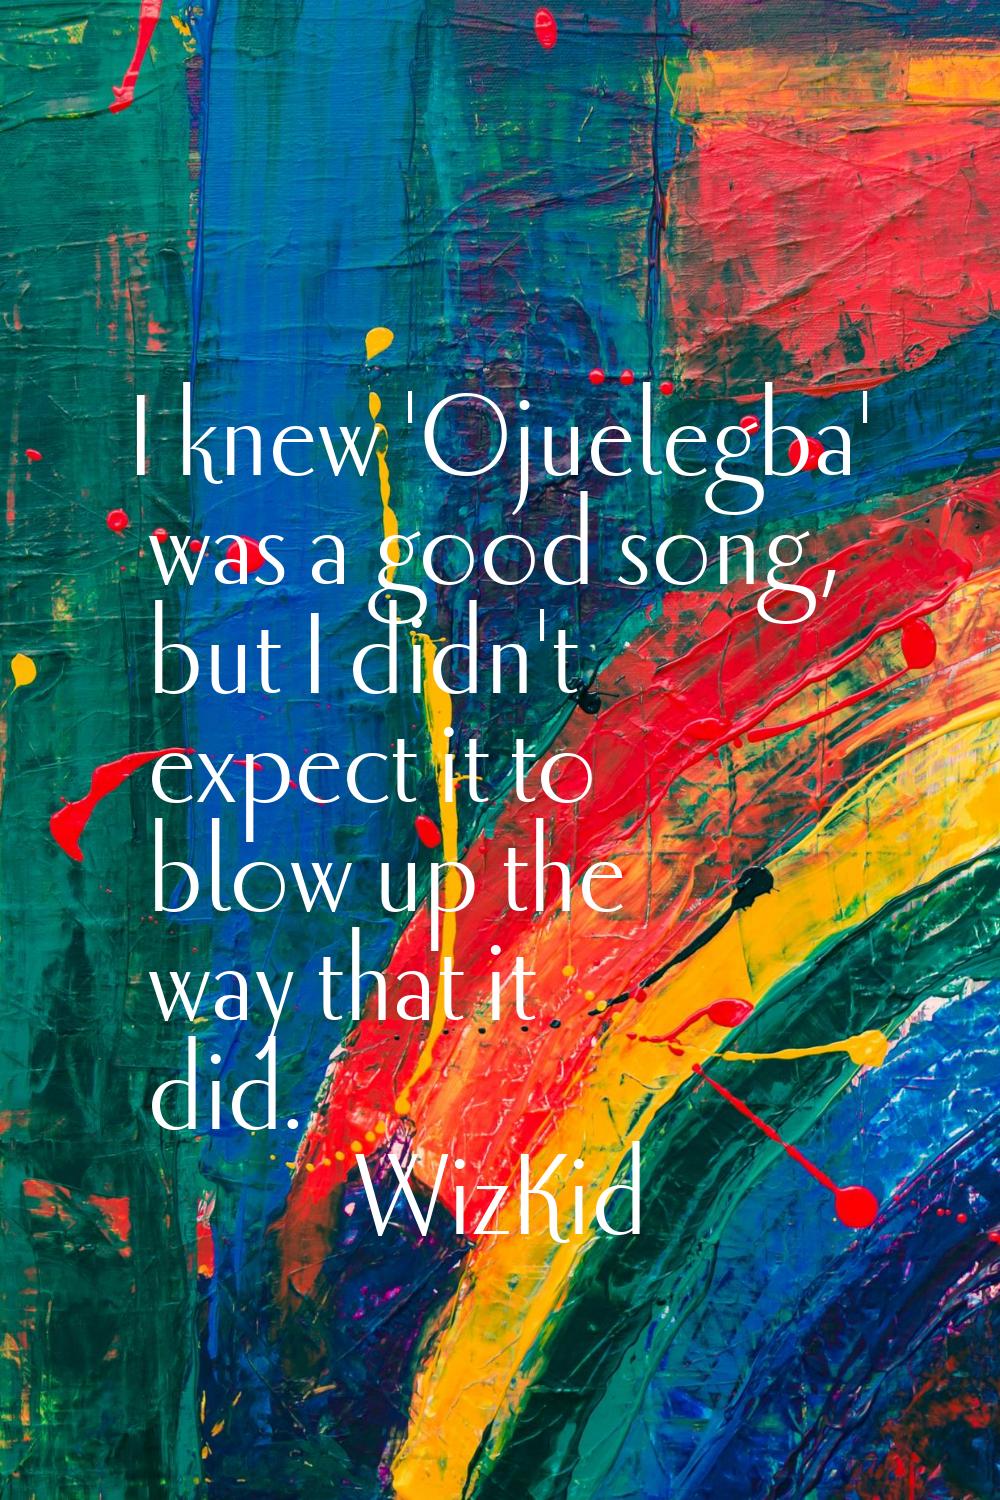 I knew 'Ojuelegba' was a good song, but I didn't expect it to blow up the way that it did.